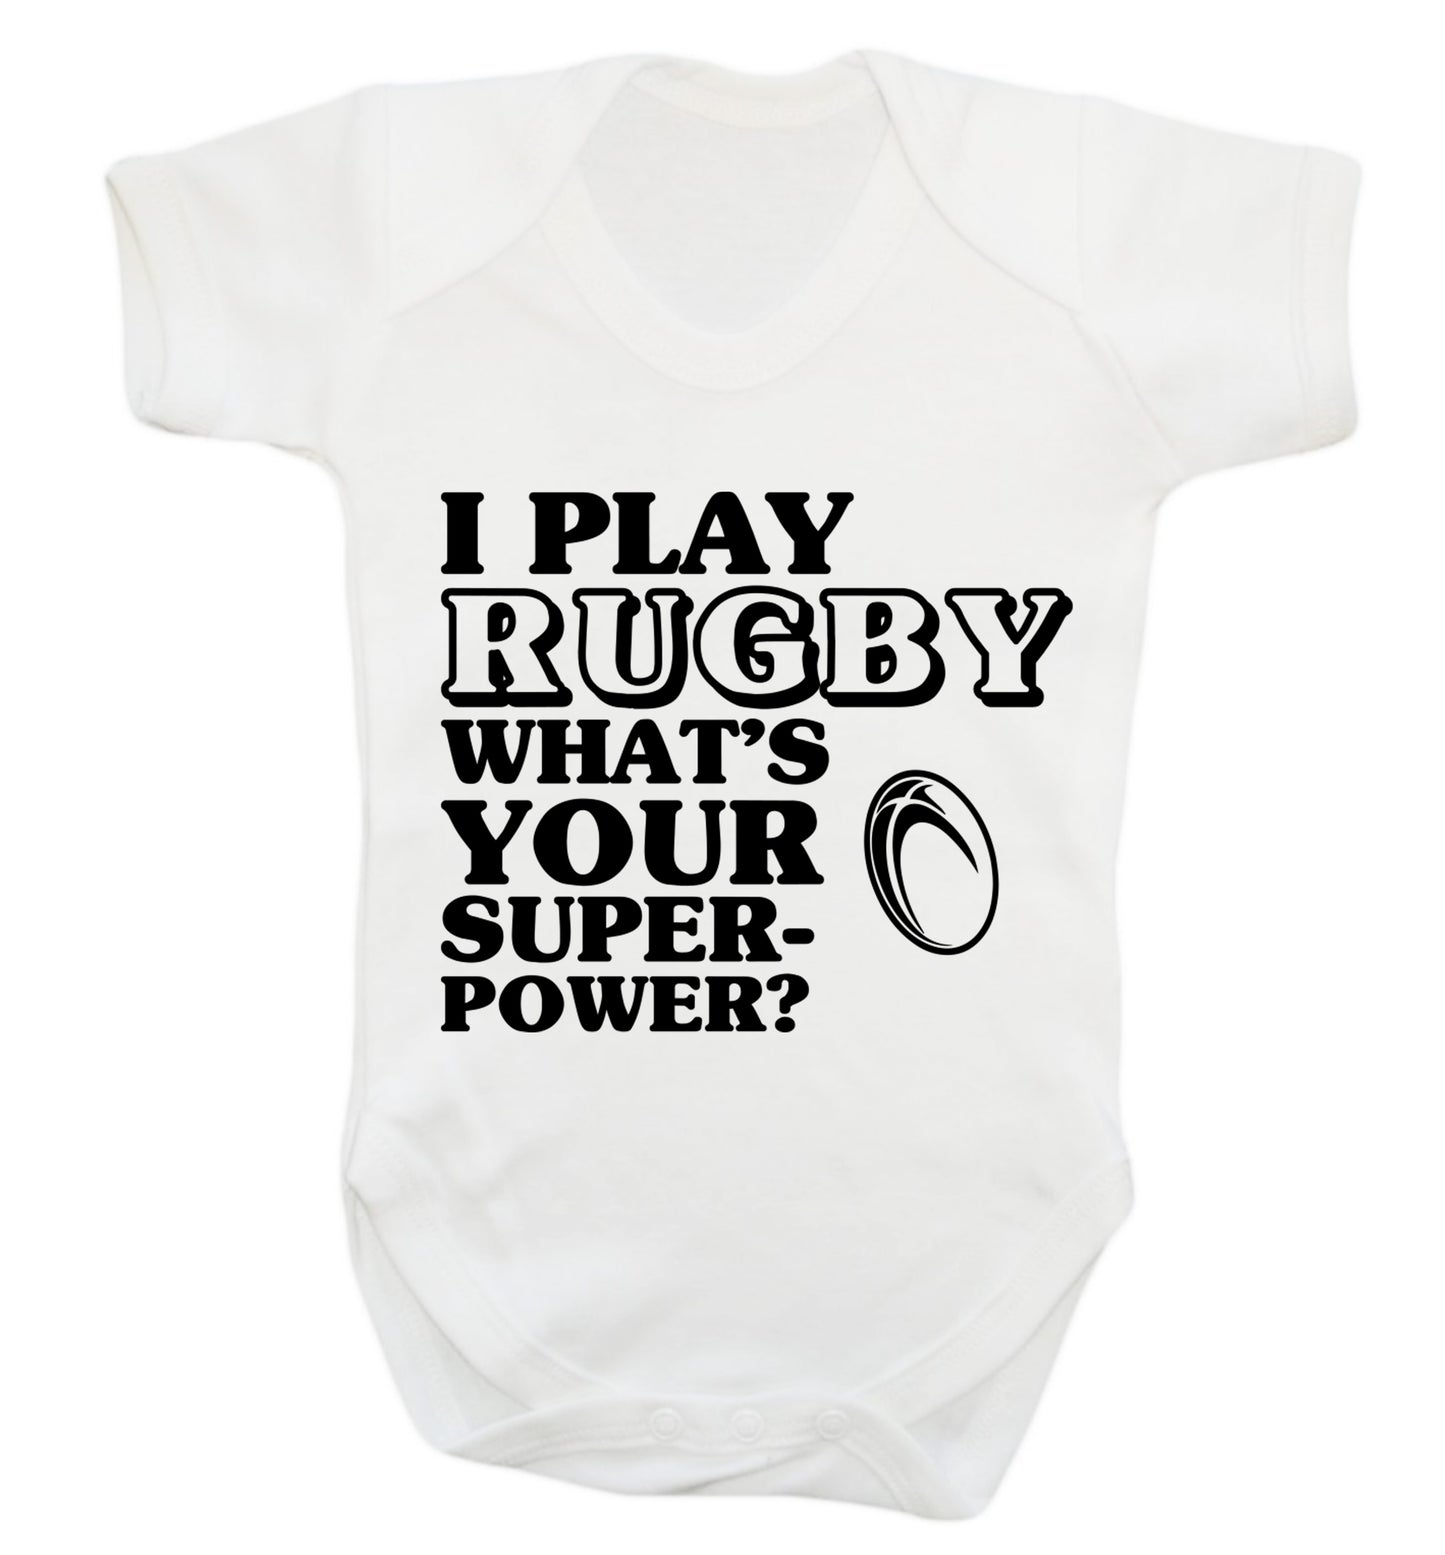 I play rugby what's your superpower? Baby Vest white 18-24 months